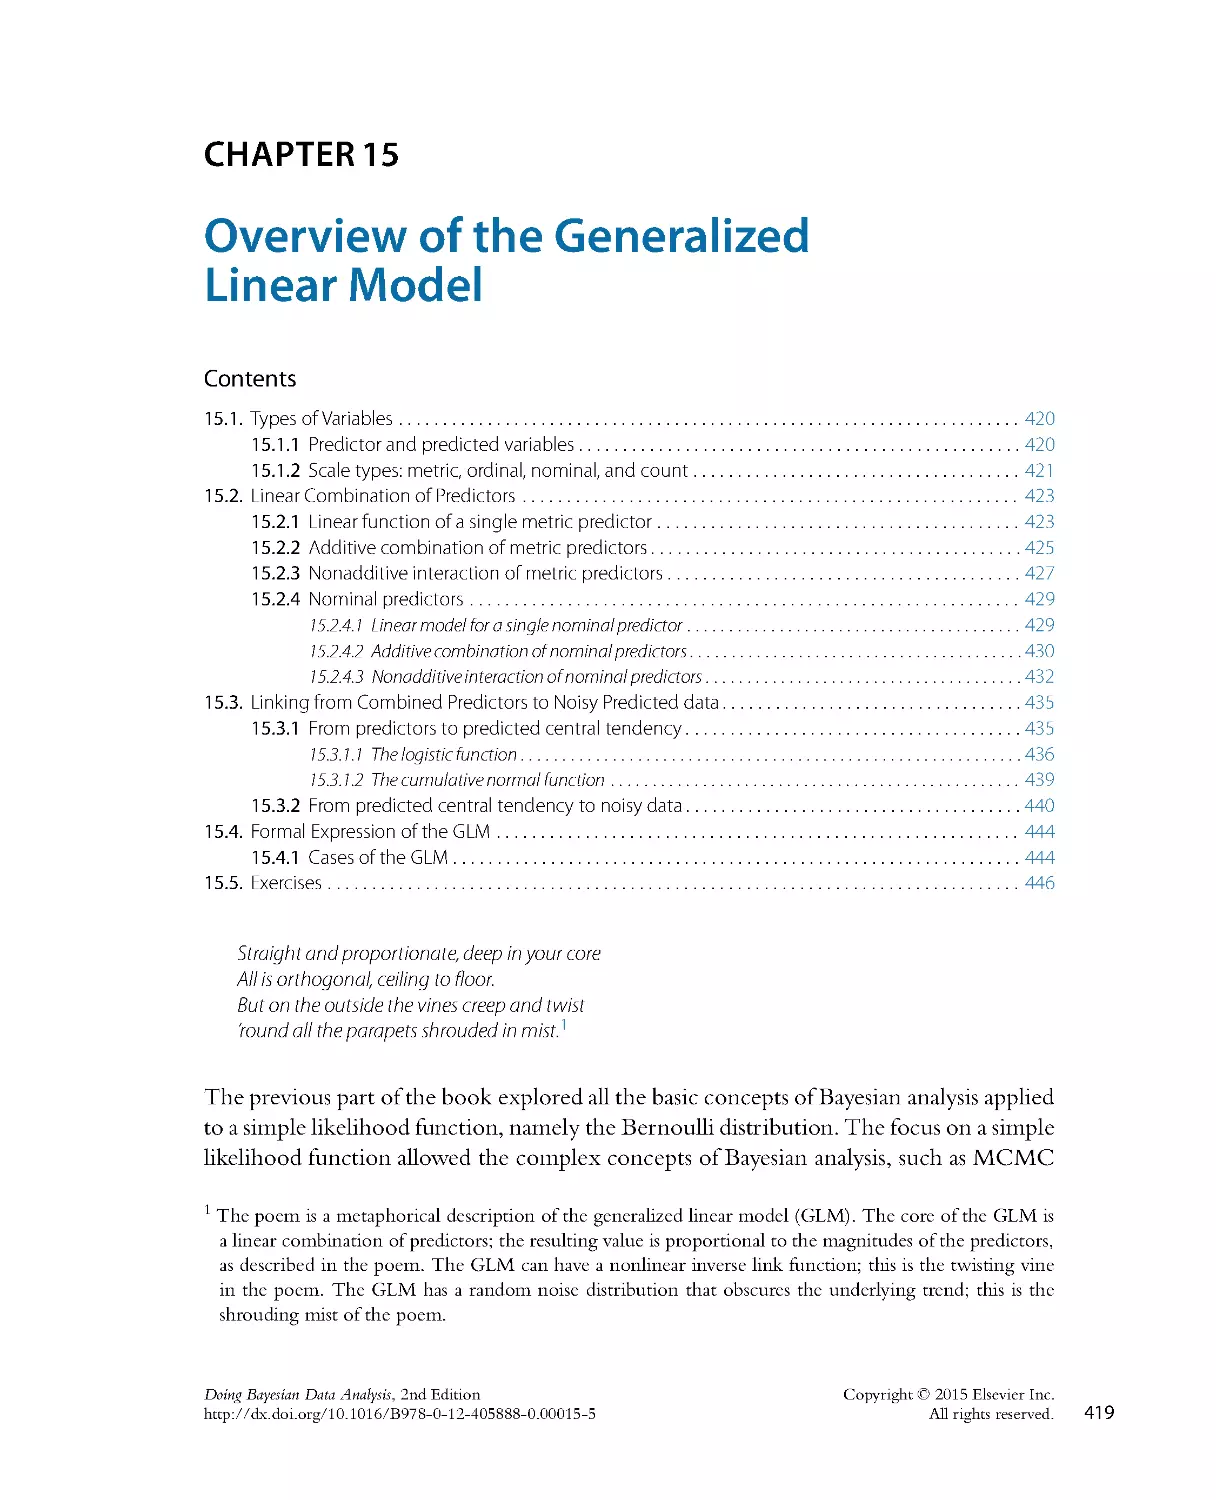 21. Chapter-15-Overview-of-the-Generalized-Linear-Model_2015_Doing-Bayesian-Data-Analysis-Second-Edition-